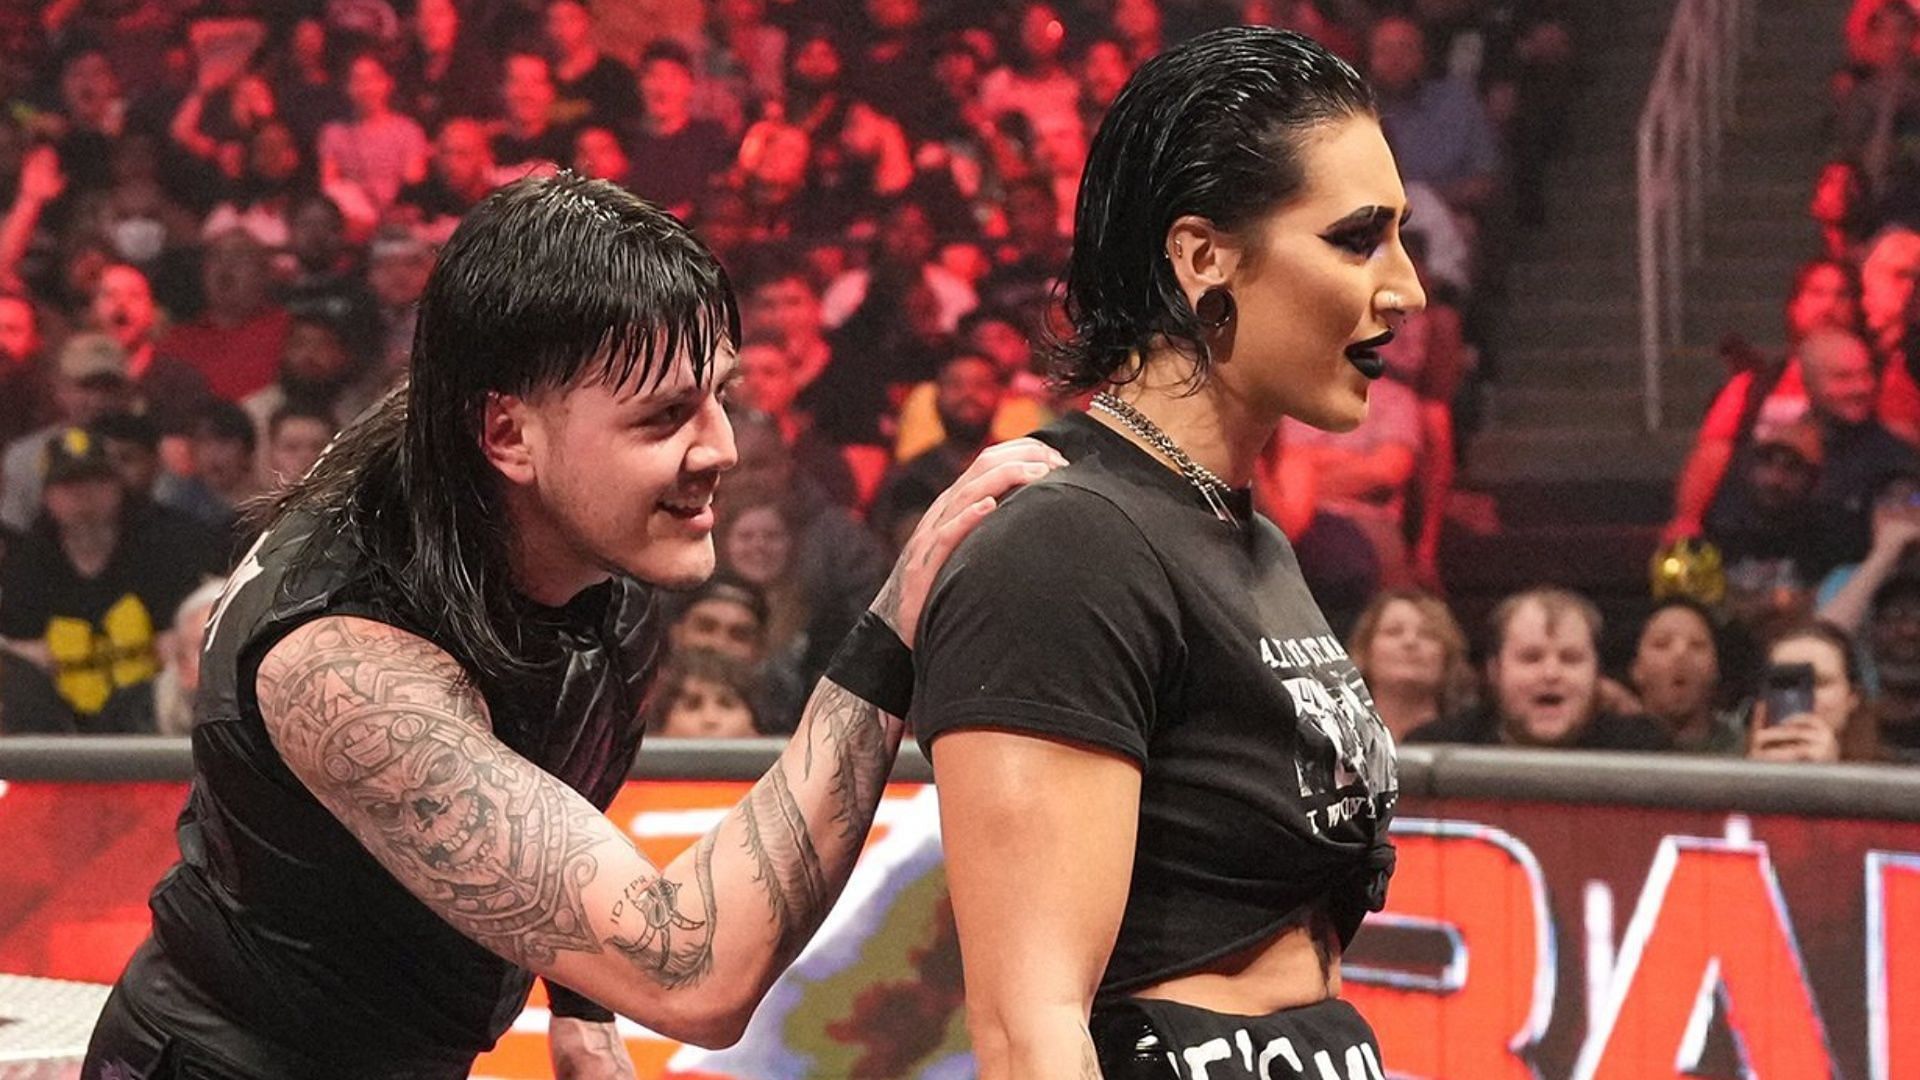 42-year-old WWE star to feud with Rhea Ripley after potential face turn ...